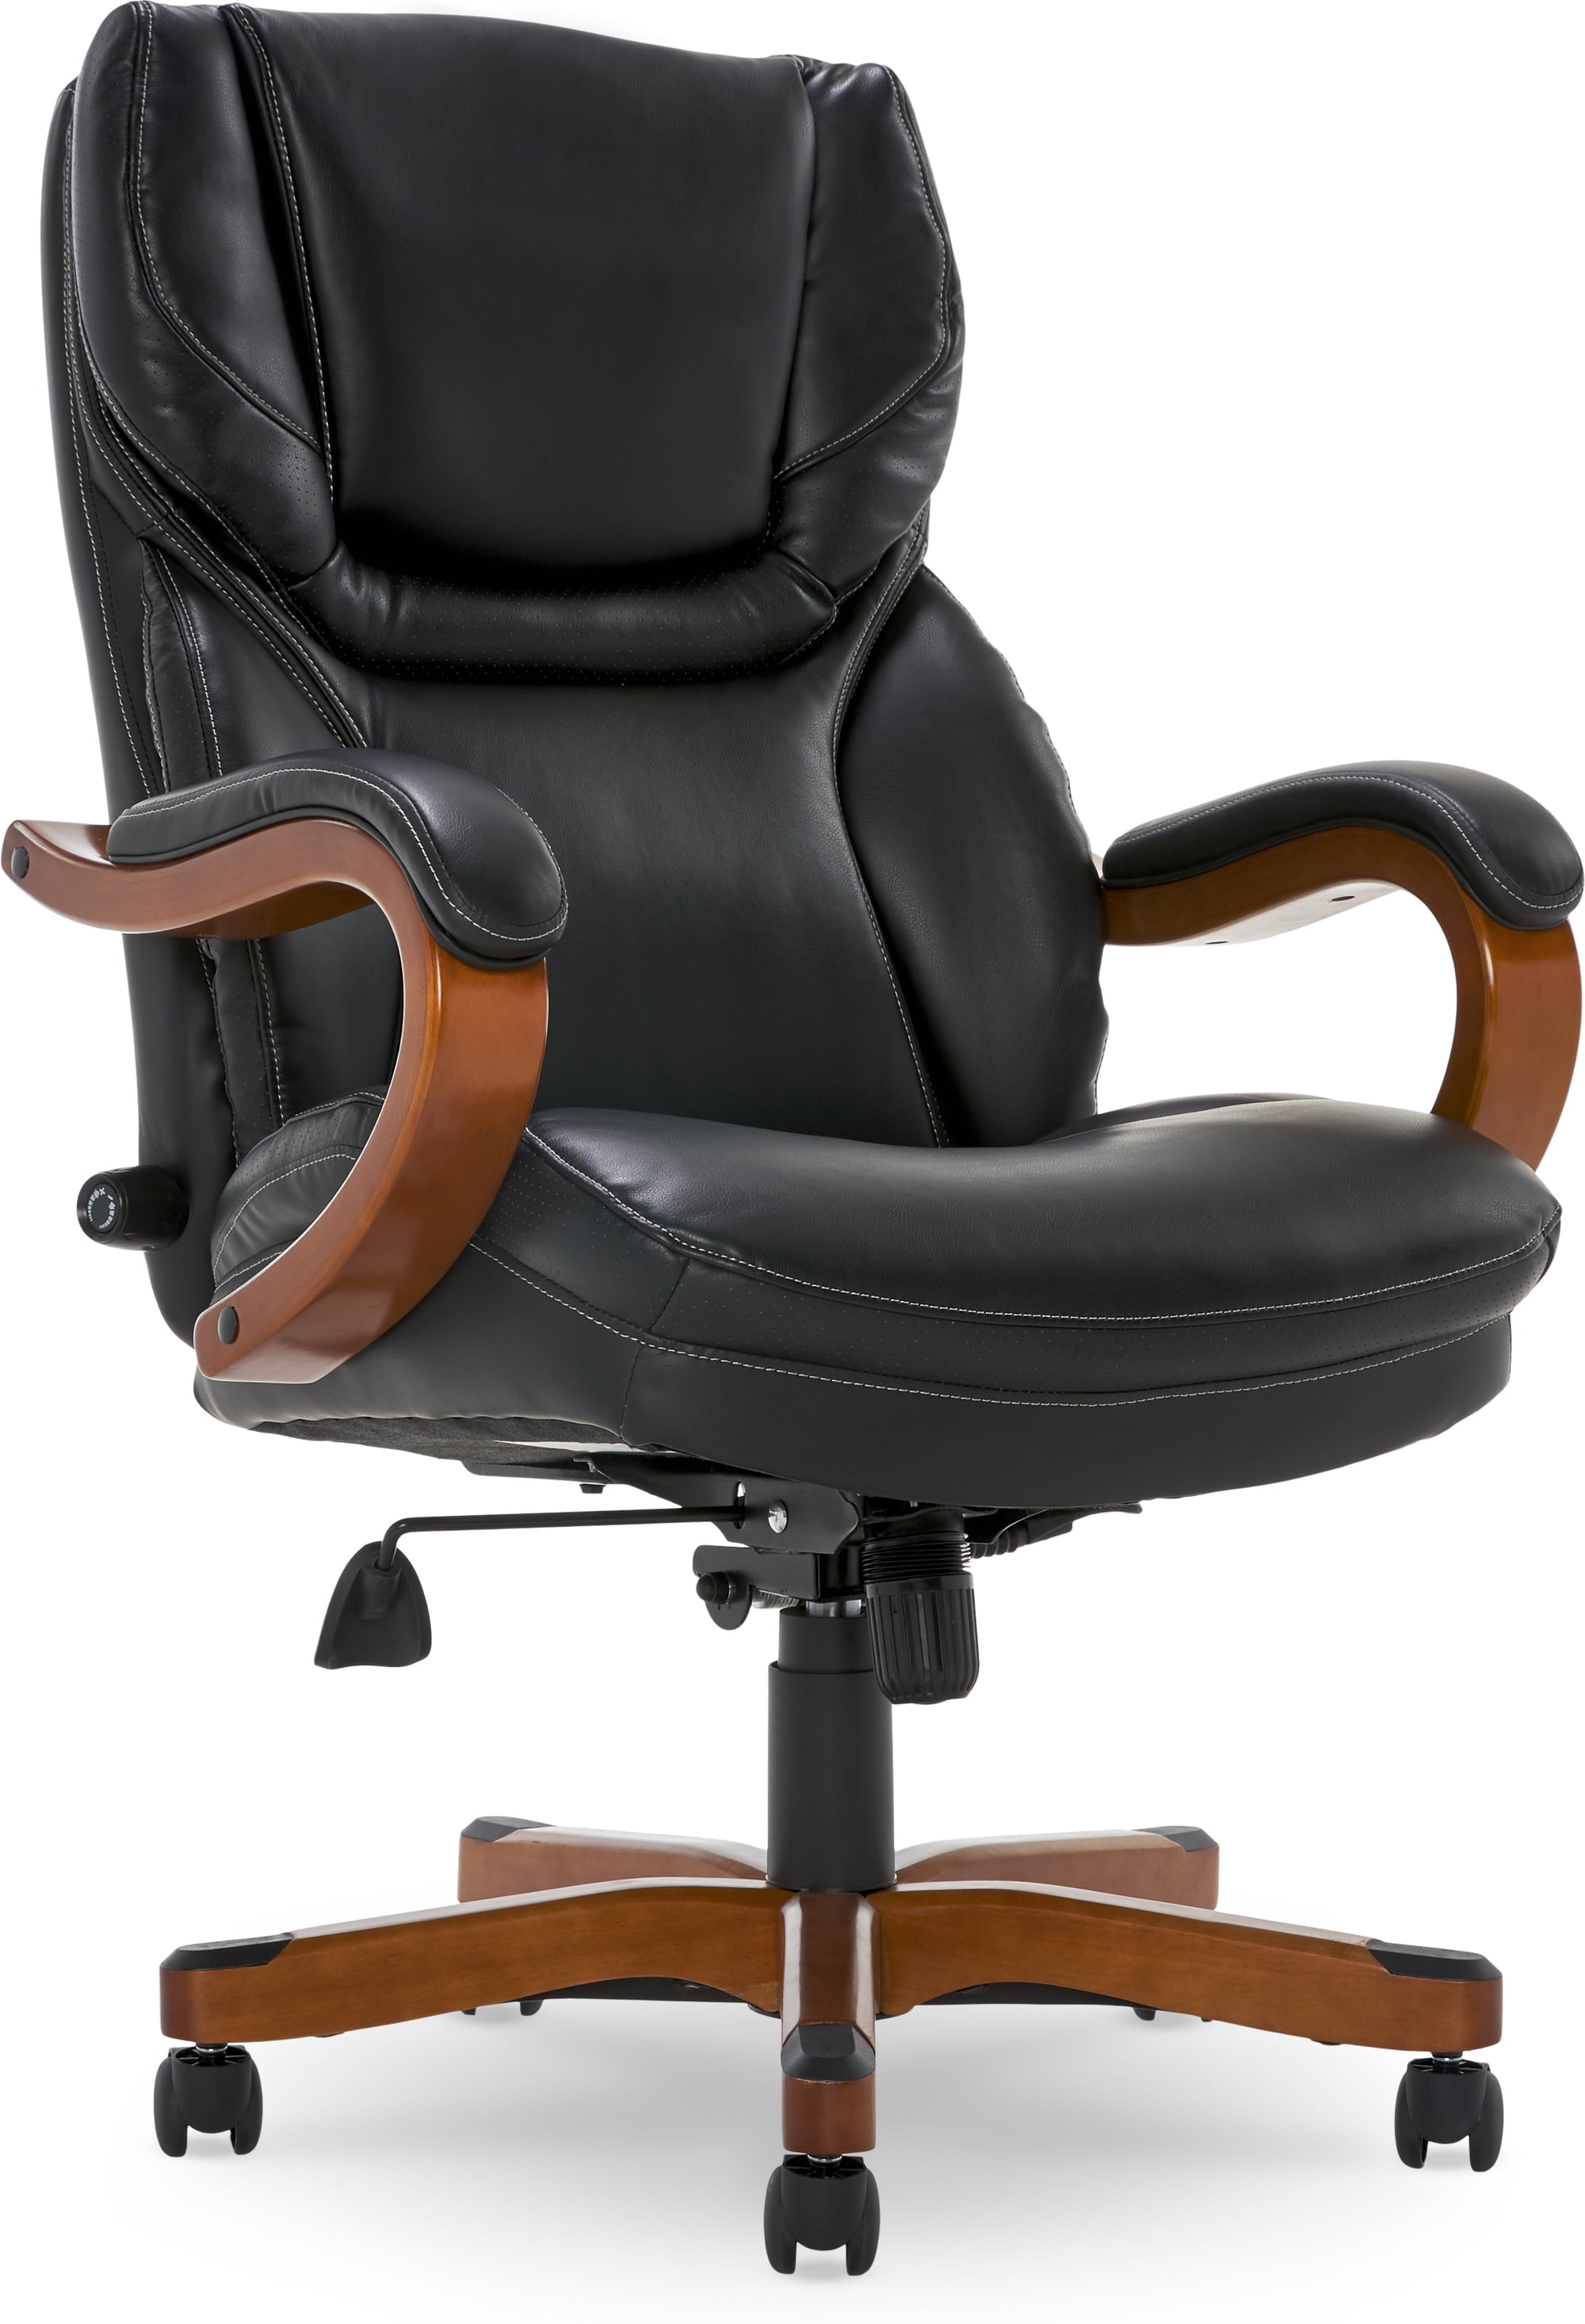 Serta Bonded Leather Big & Tall Office Chair with Wood Arms, 350 lb.  Capacity, Brown 